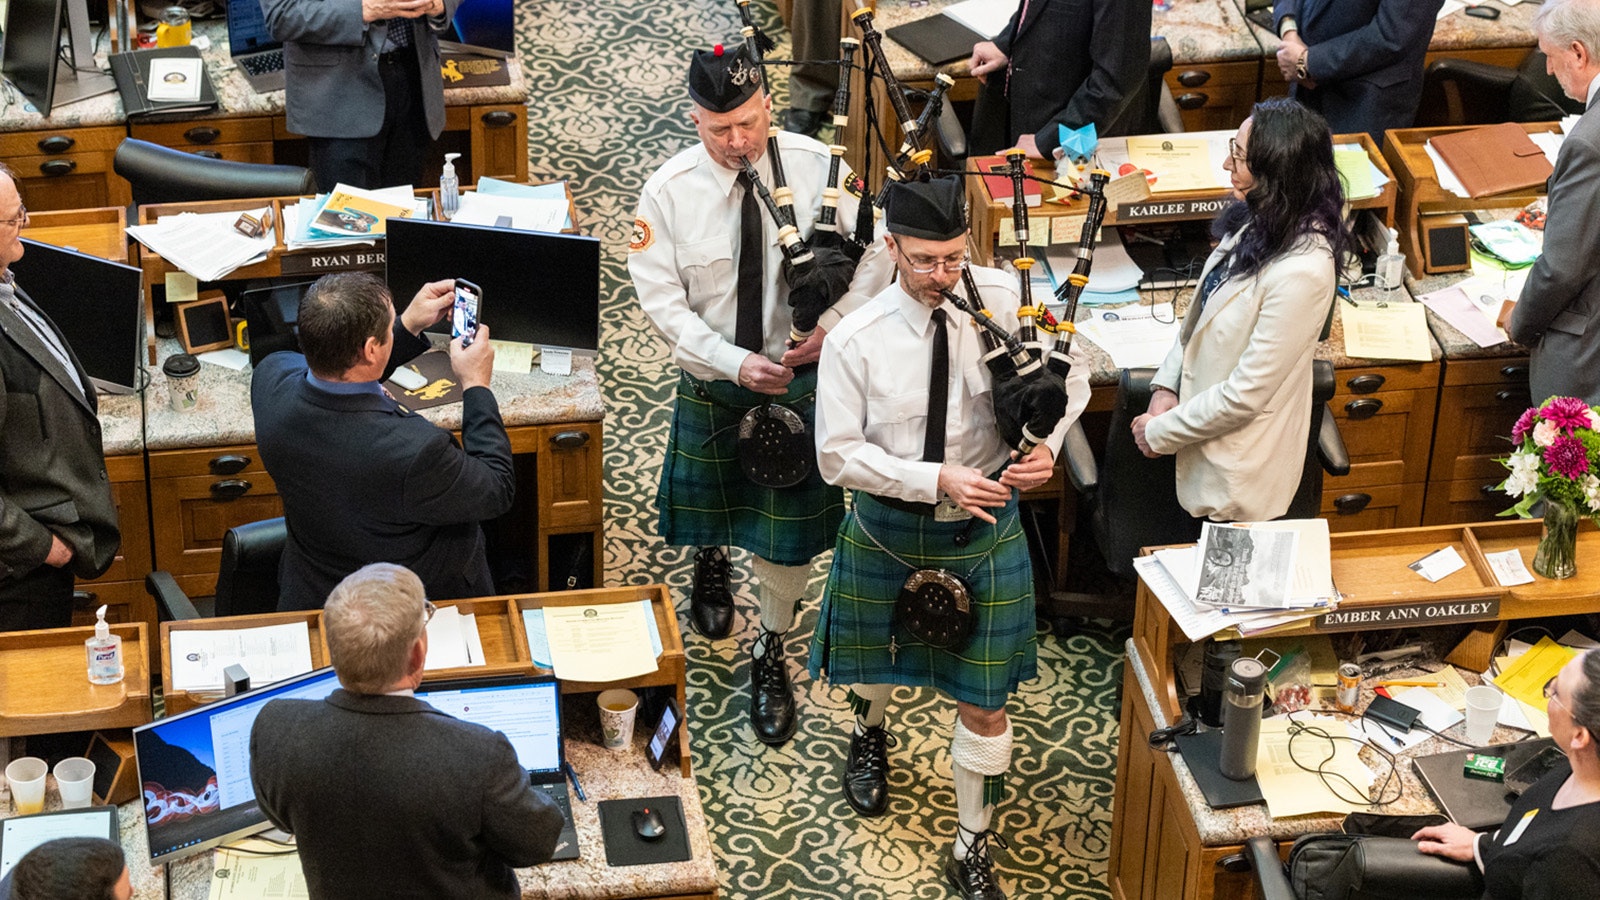 Bagpipers at Capitol 9 2 17 23